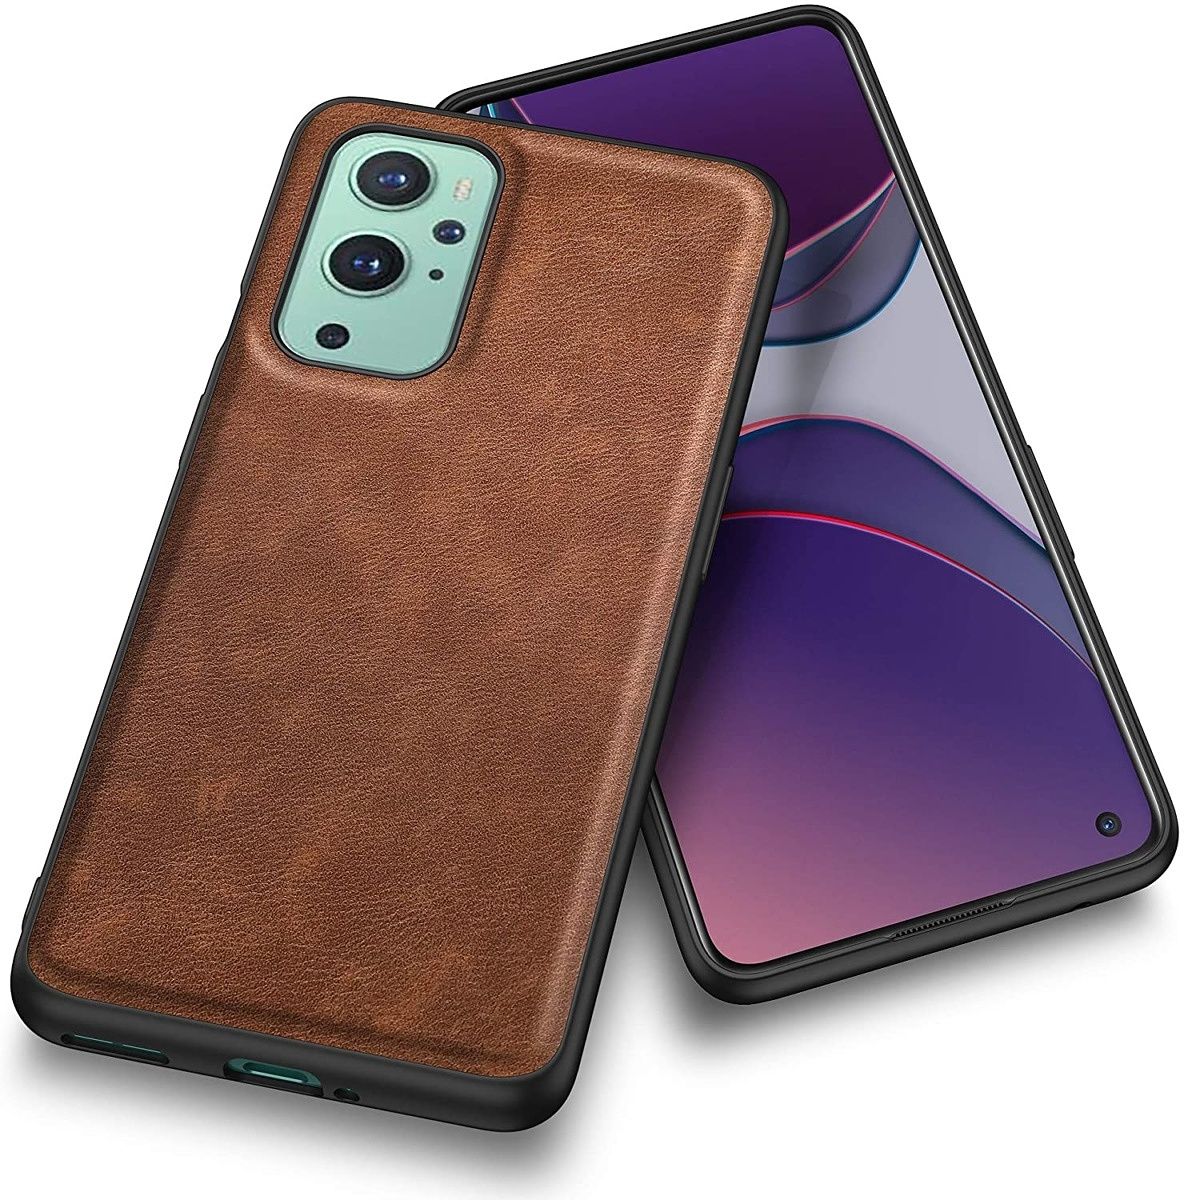 Made from high-end leather, TPU bumper and polycarbonate internal shell, this stylish case from Kqimi is a breathe of a fresh air from other run-of-the-mill silicone cases. It has 1.0mm thick cushioning layer on the back for added protection against drops.